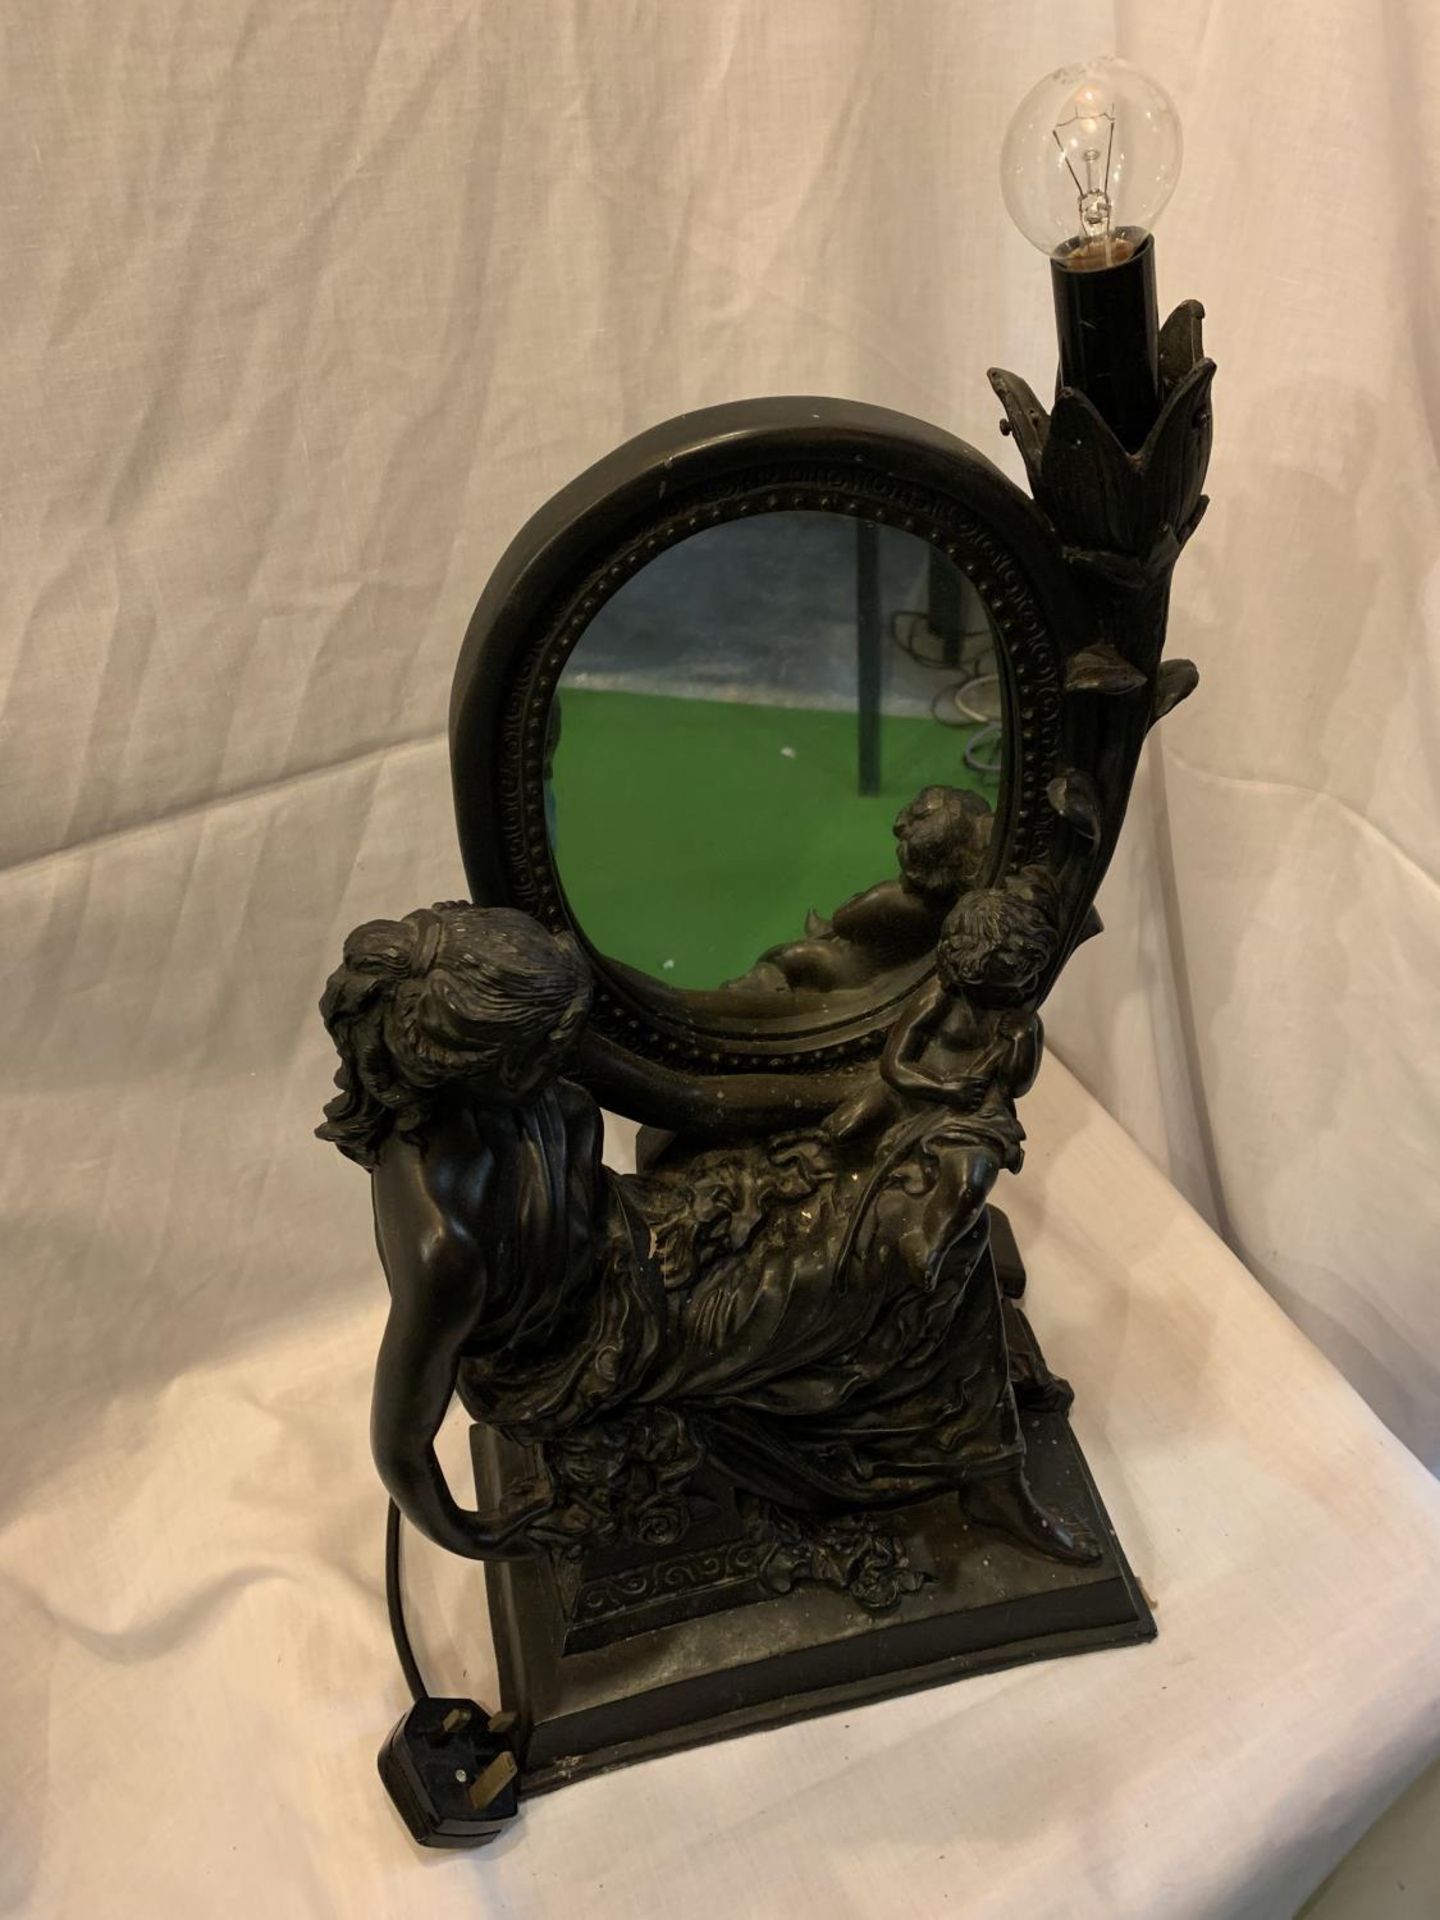 A DECORATIVE RESIN LAMP WITH MIRROR DEPICTING A MOTHER AND CHILD - Image 3 of 3